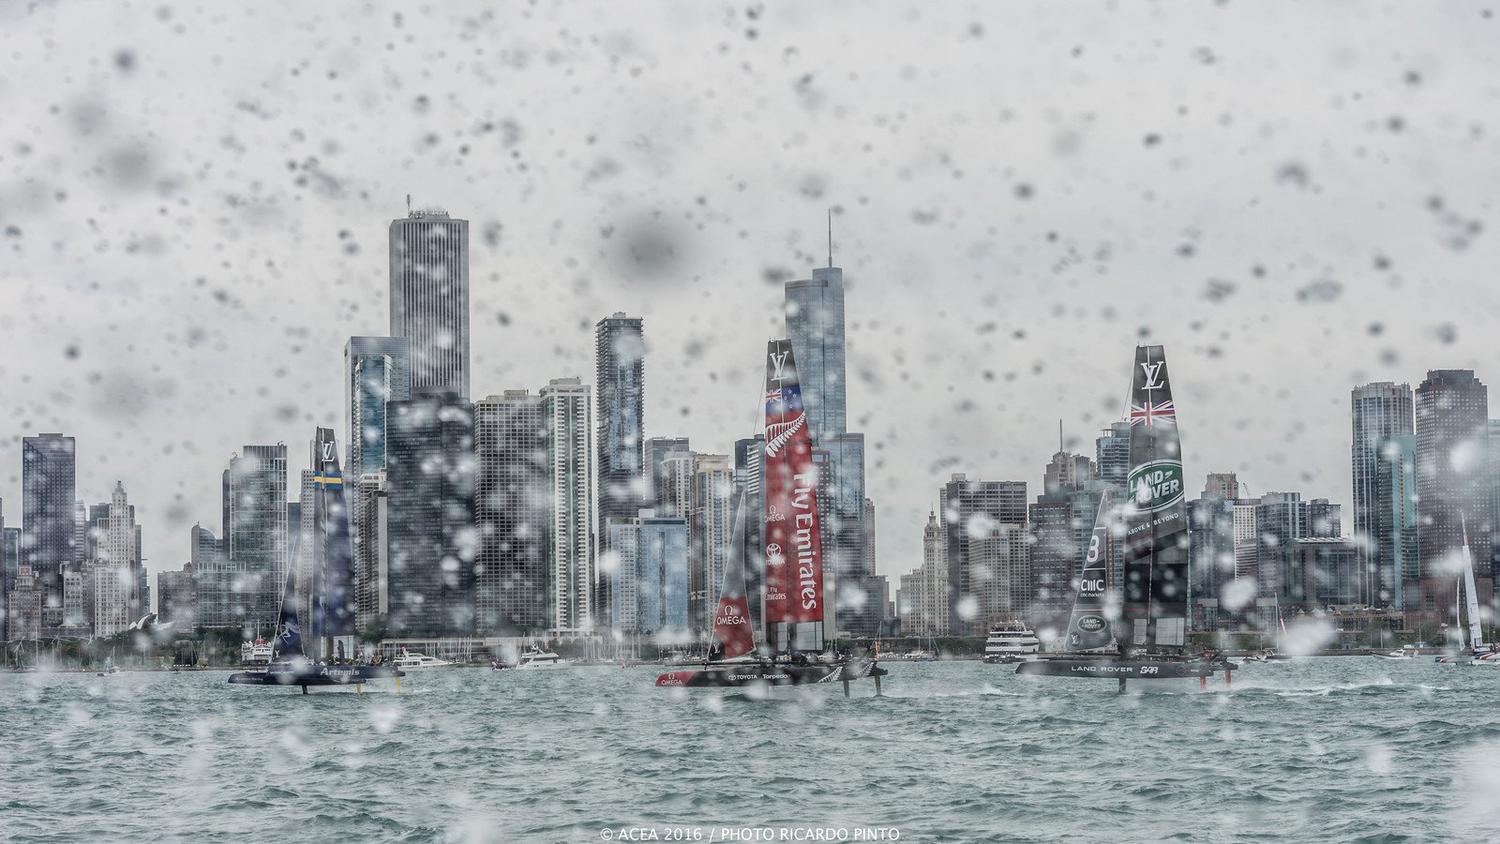 After the craziness of New York, don’t expect things to get easier in The Windy City